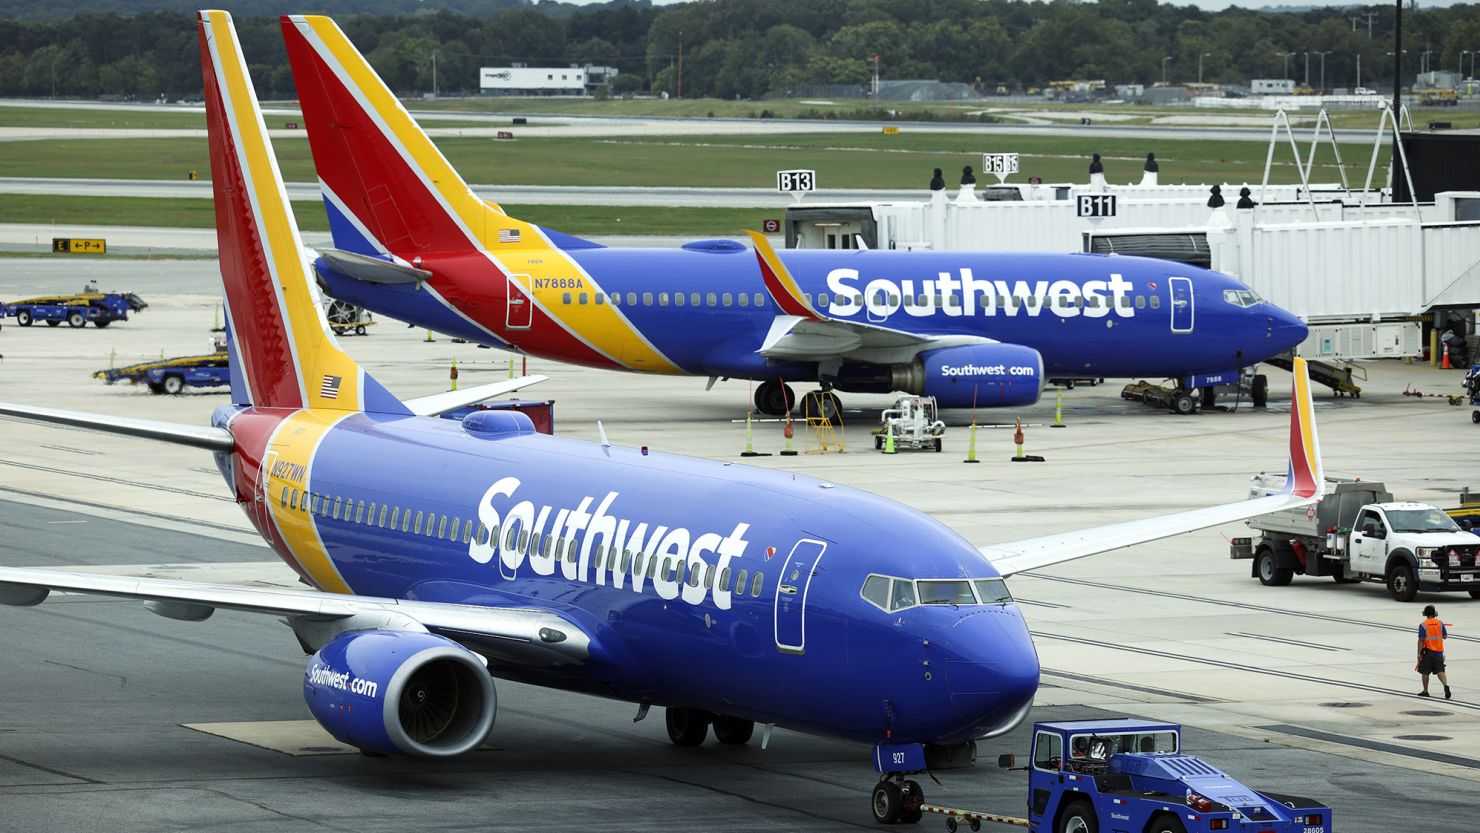 An off-duty pilot stepped in to help after a Southwest pilot became ill during a flight, the airline said.